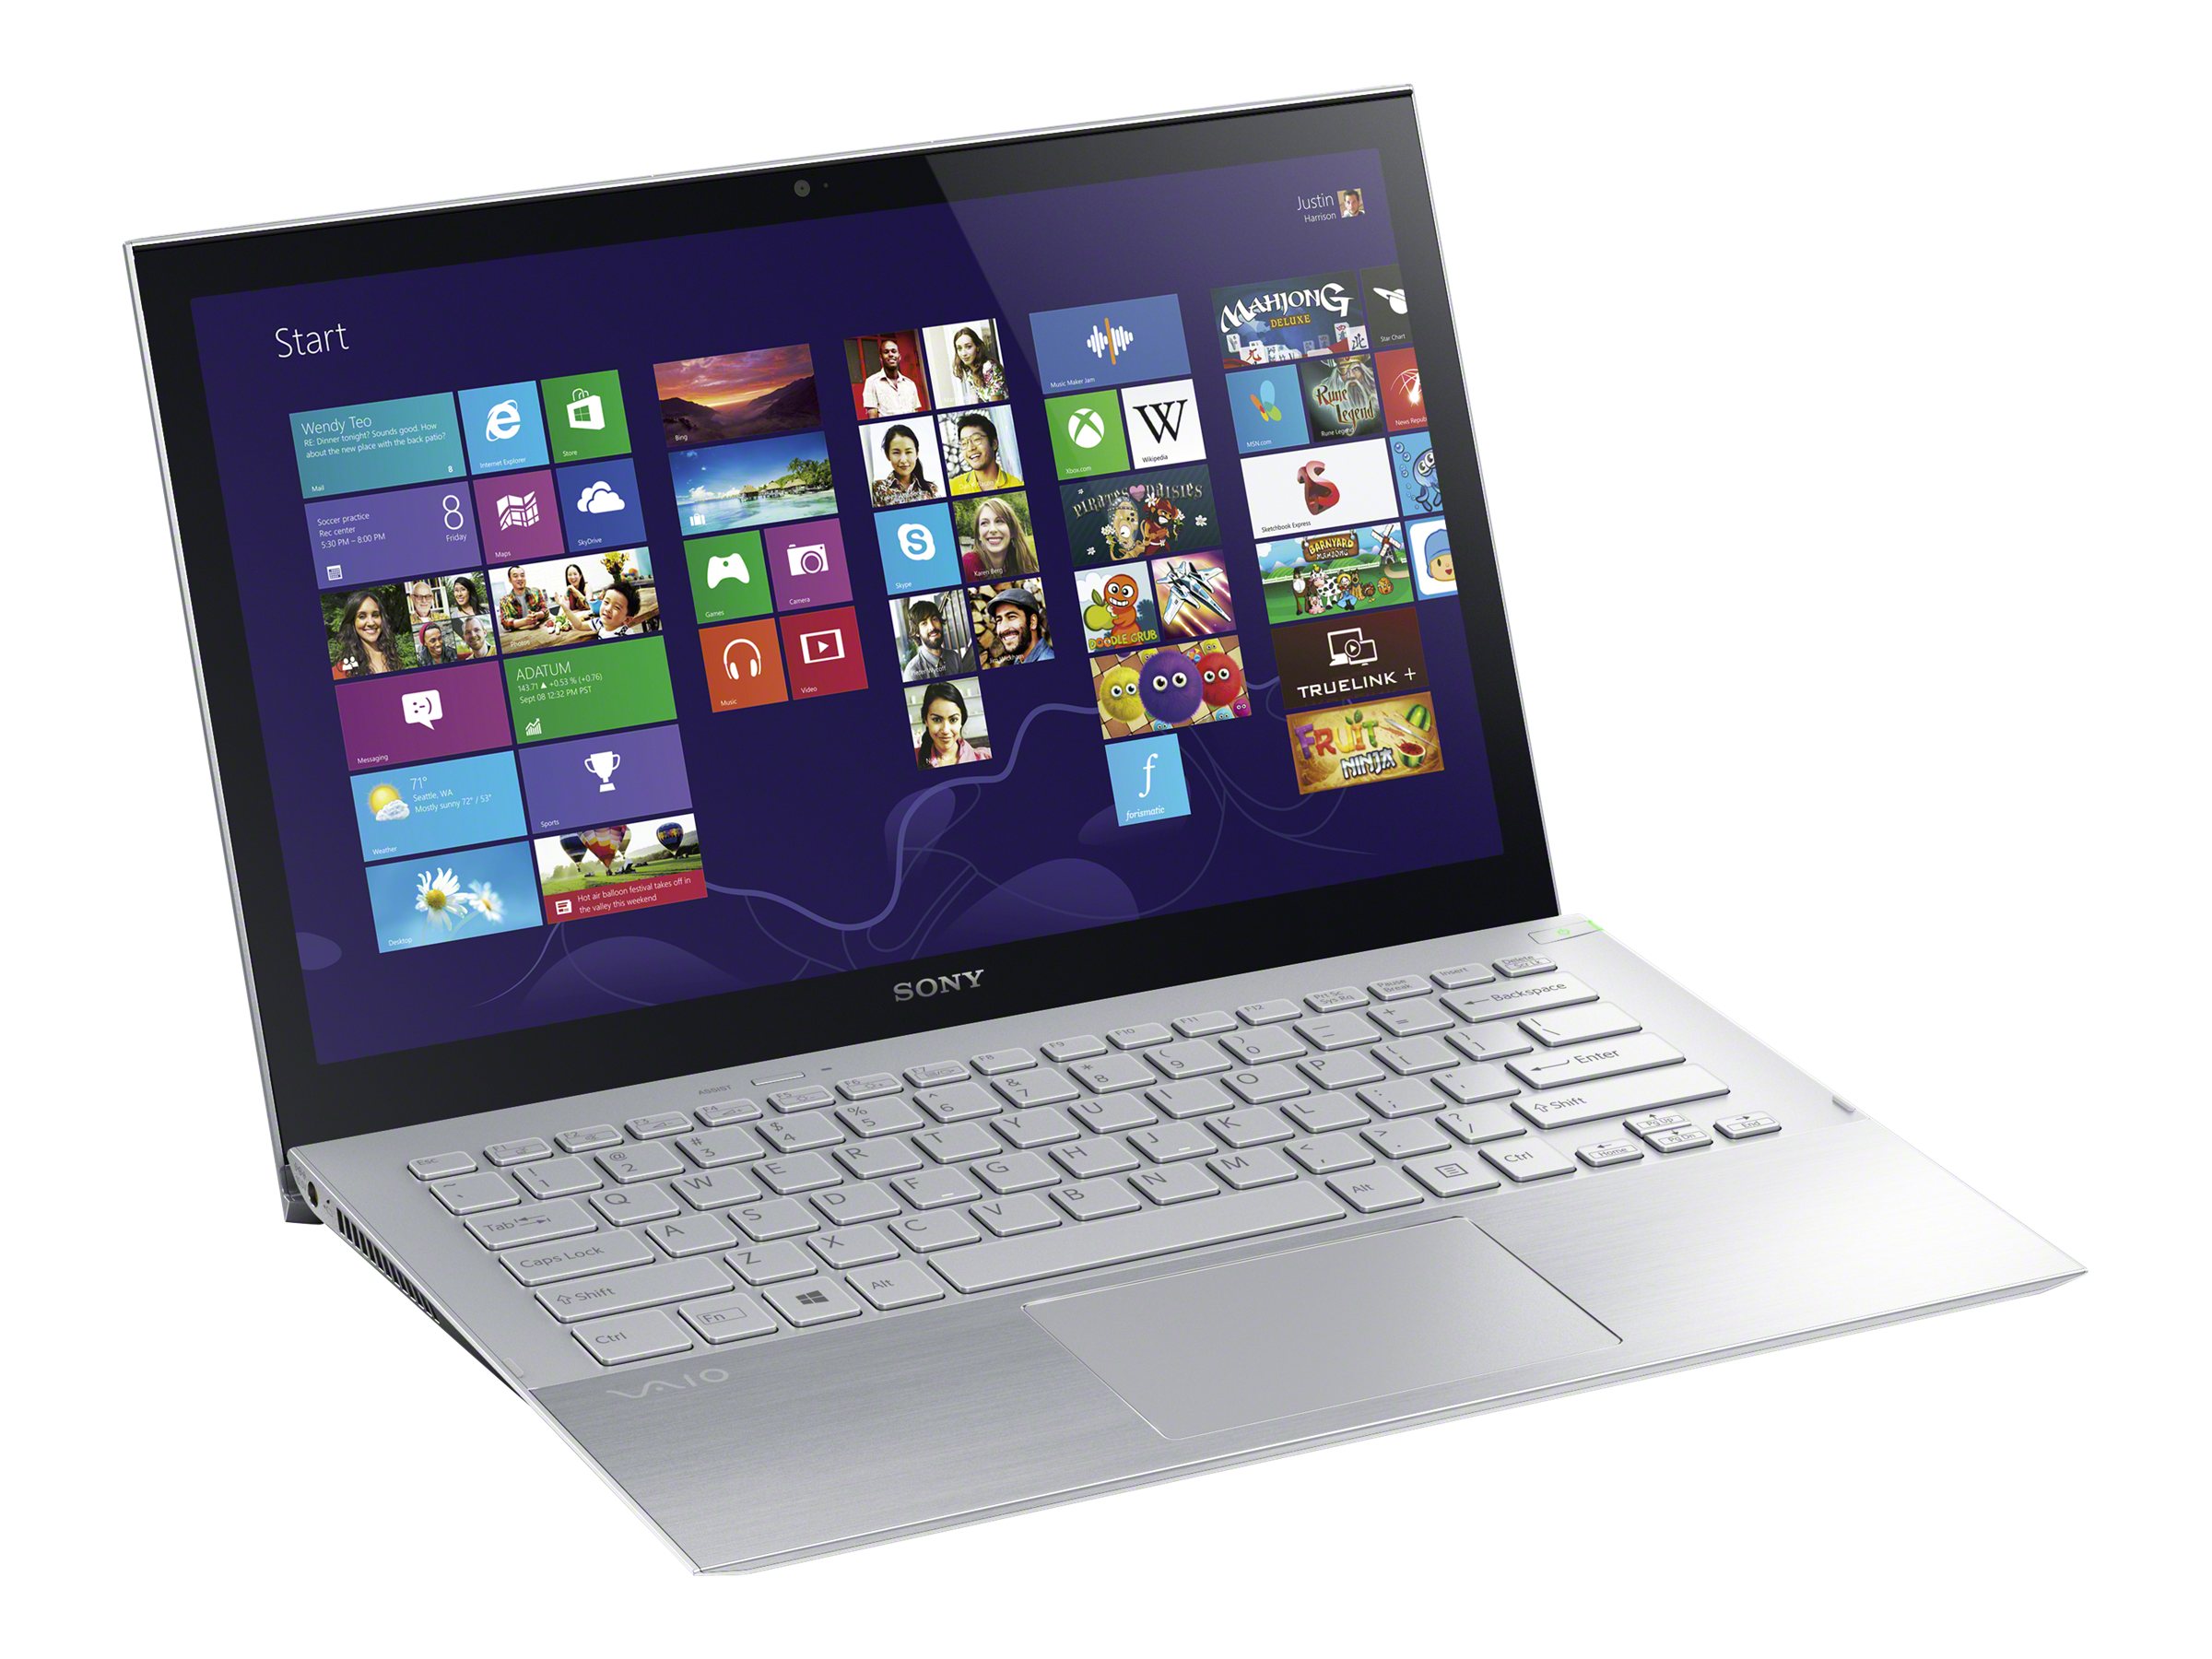 Sony VAIO Pro SVP1322B4E - full specs, details and review